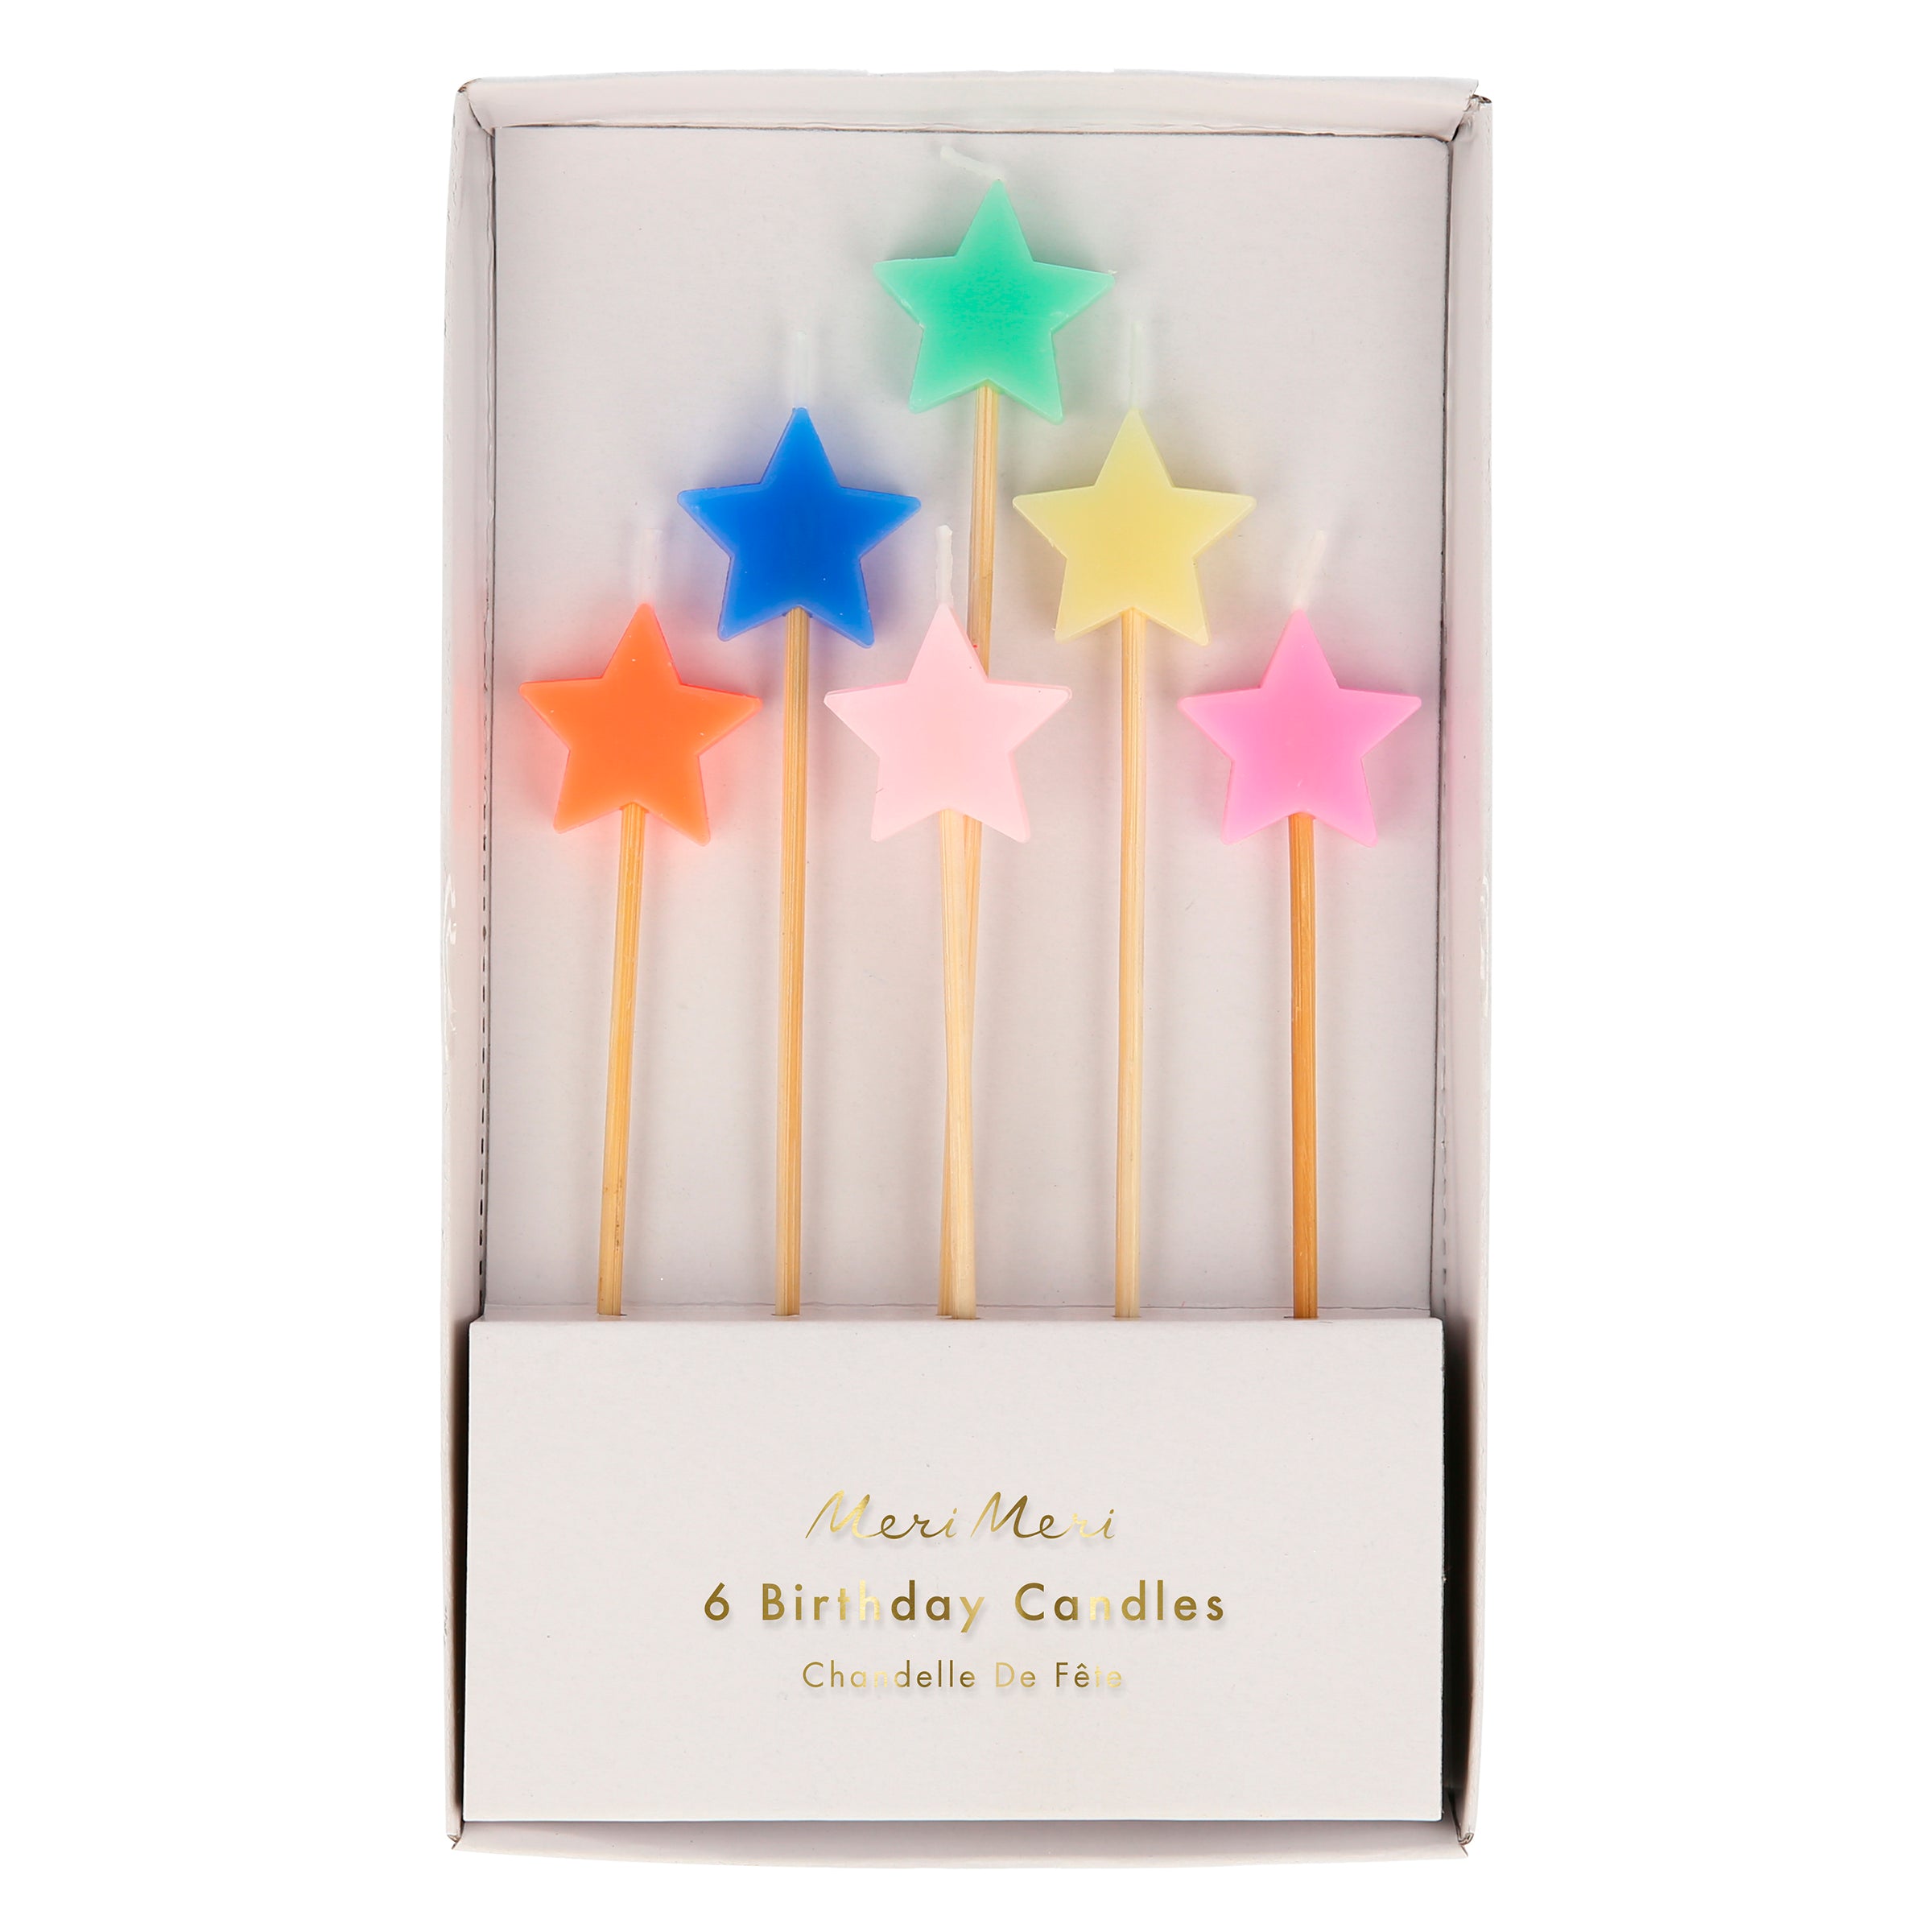 Our birthday cake candles, in the shape of stars, look amazing. They're perfect as baby shower candles too.